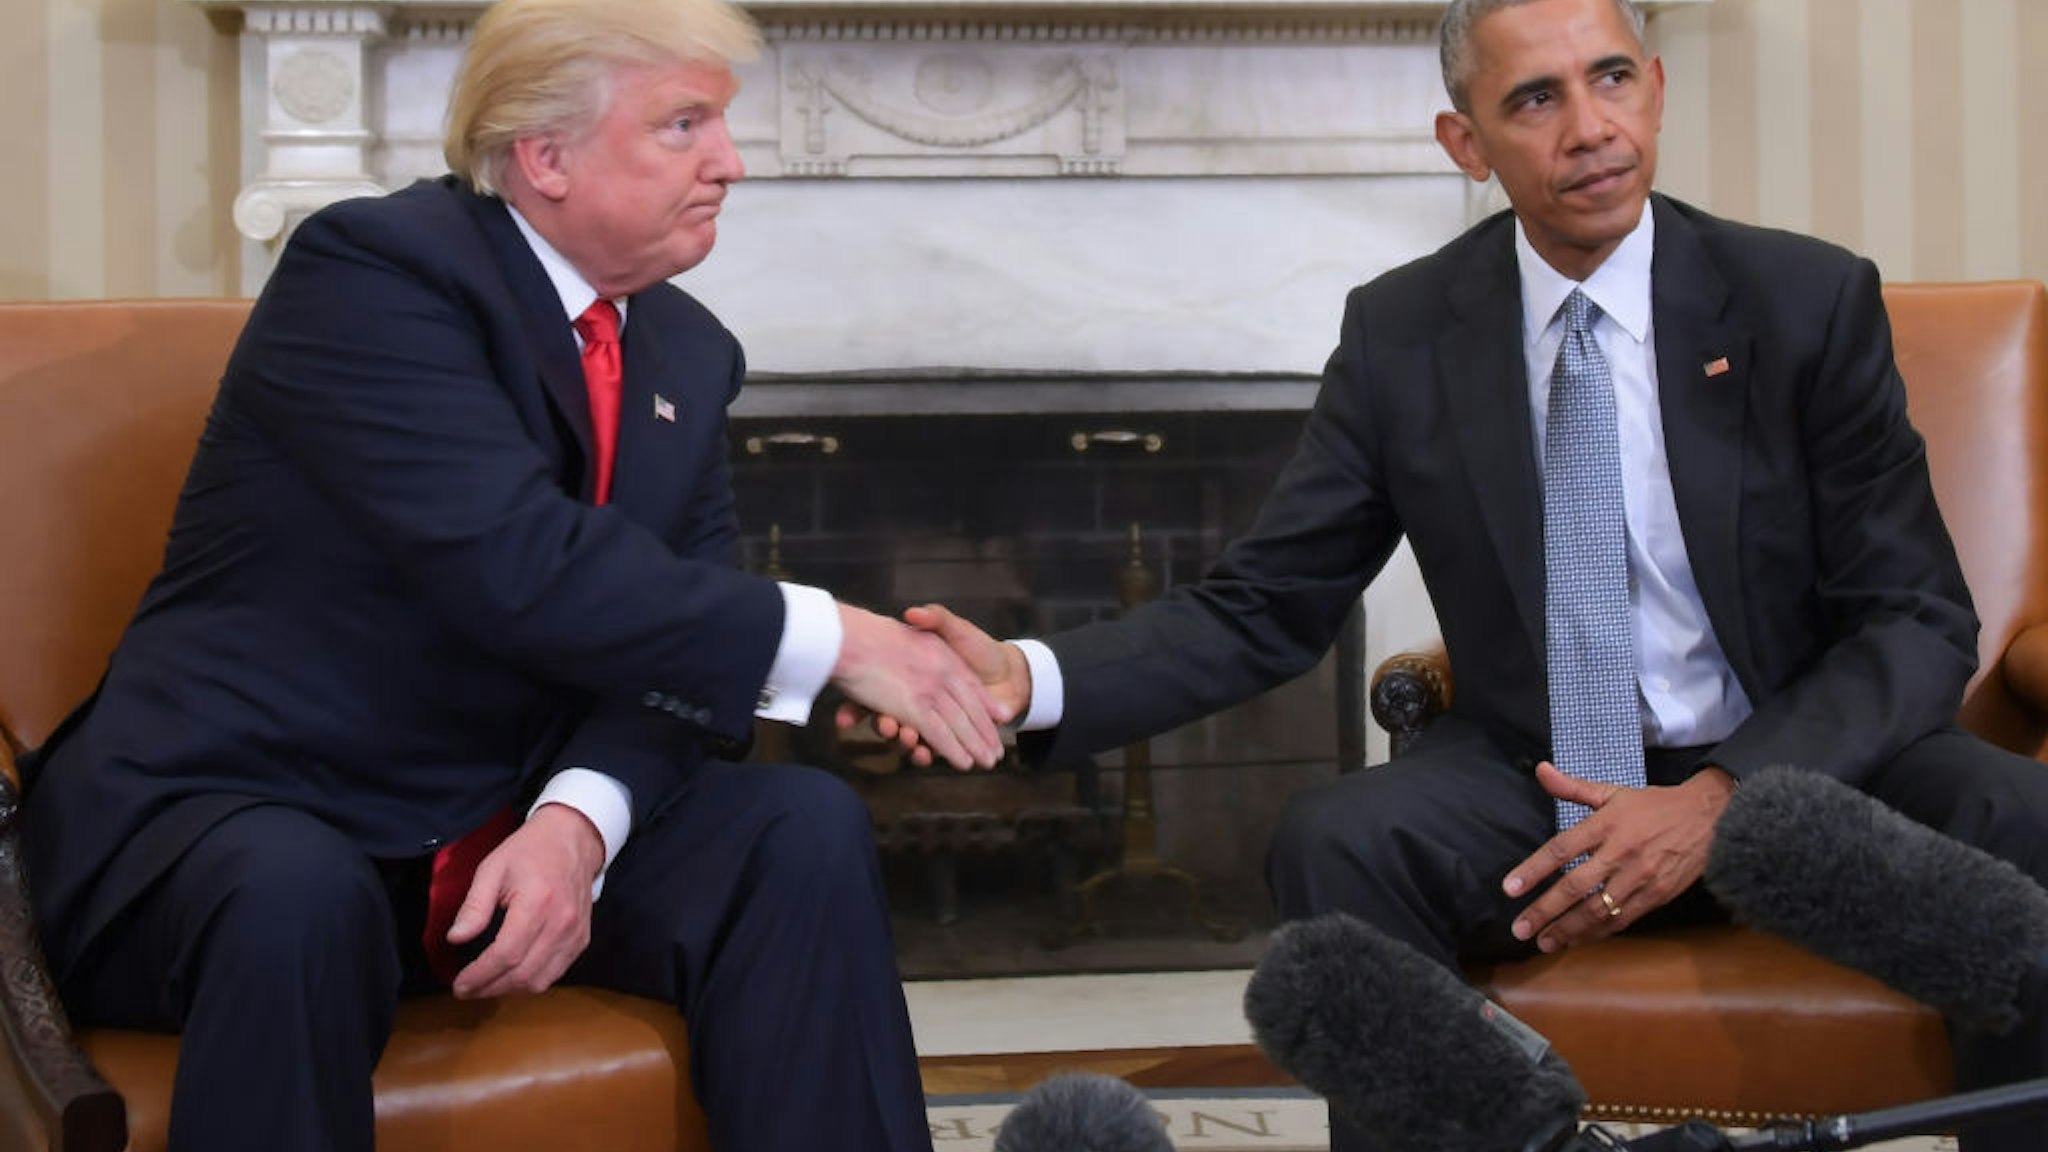 In this file photo taken on November 10, 2016, US President Barack Obama and President-elect Donald Trump shake hands during a transition planning meeting in the Oval Office at the White House in Washington, DC.